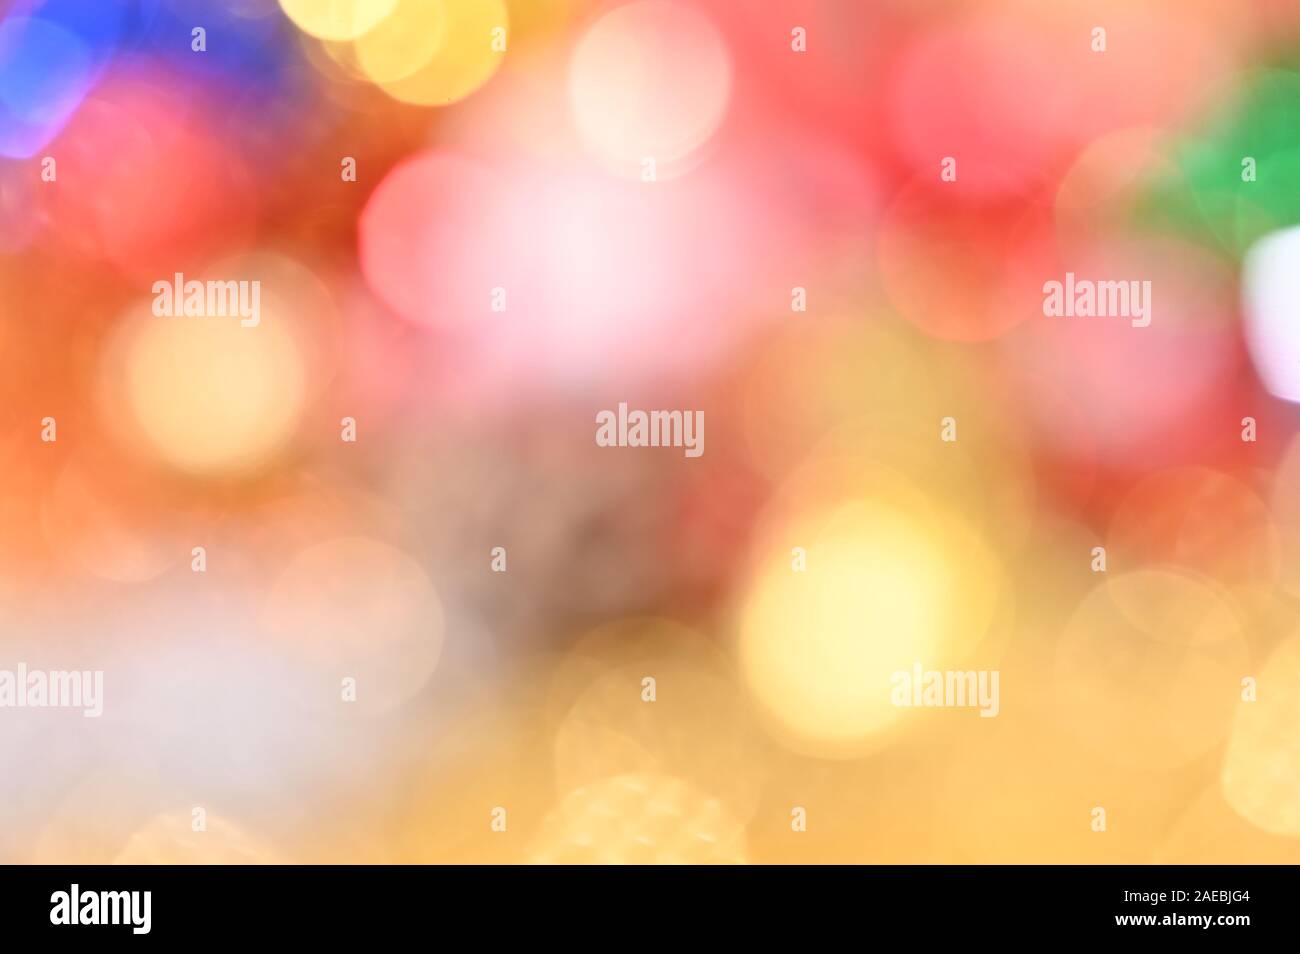 christmas light colorful red yellow green blue defocused bokeh light decorative background Stock Photo